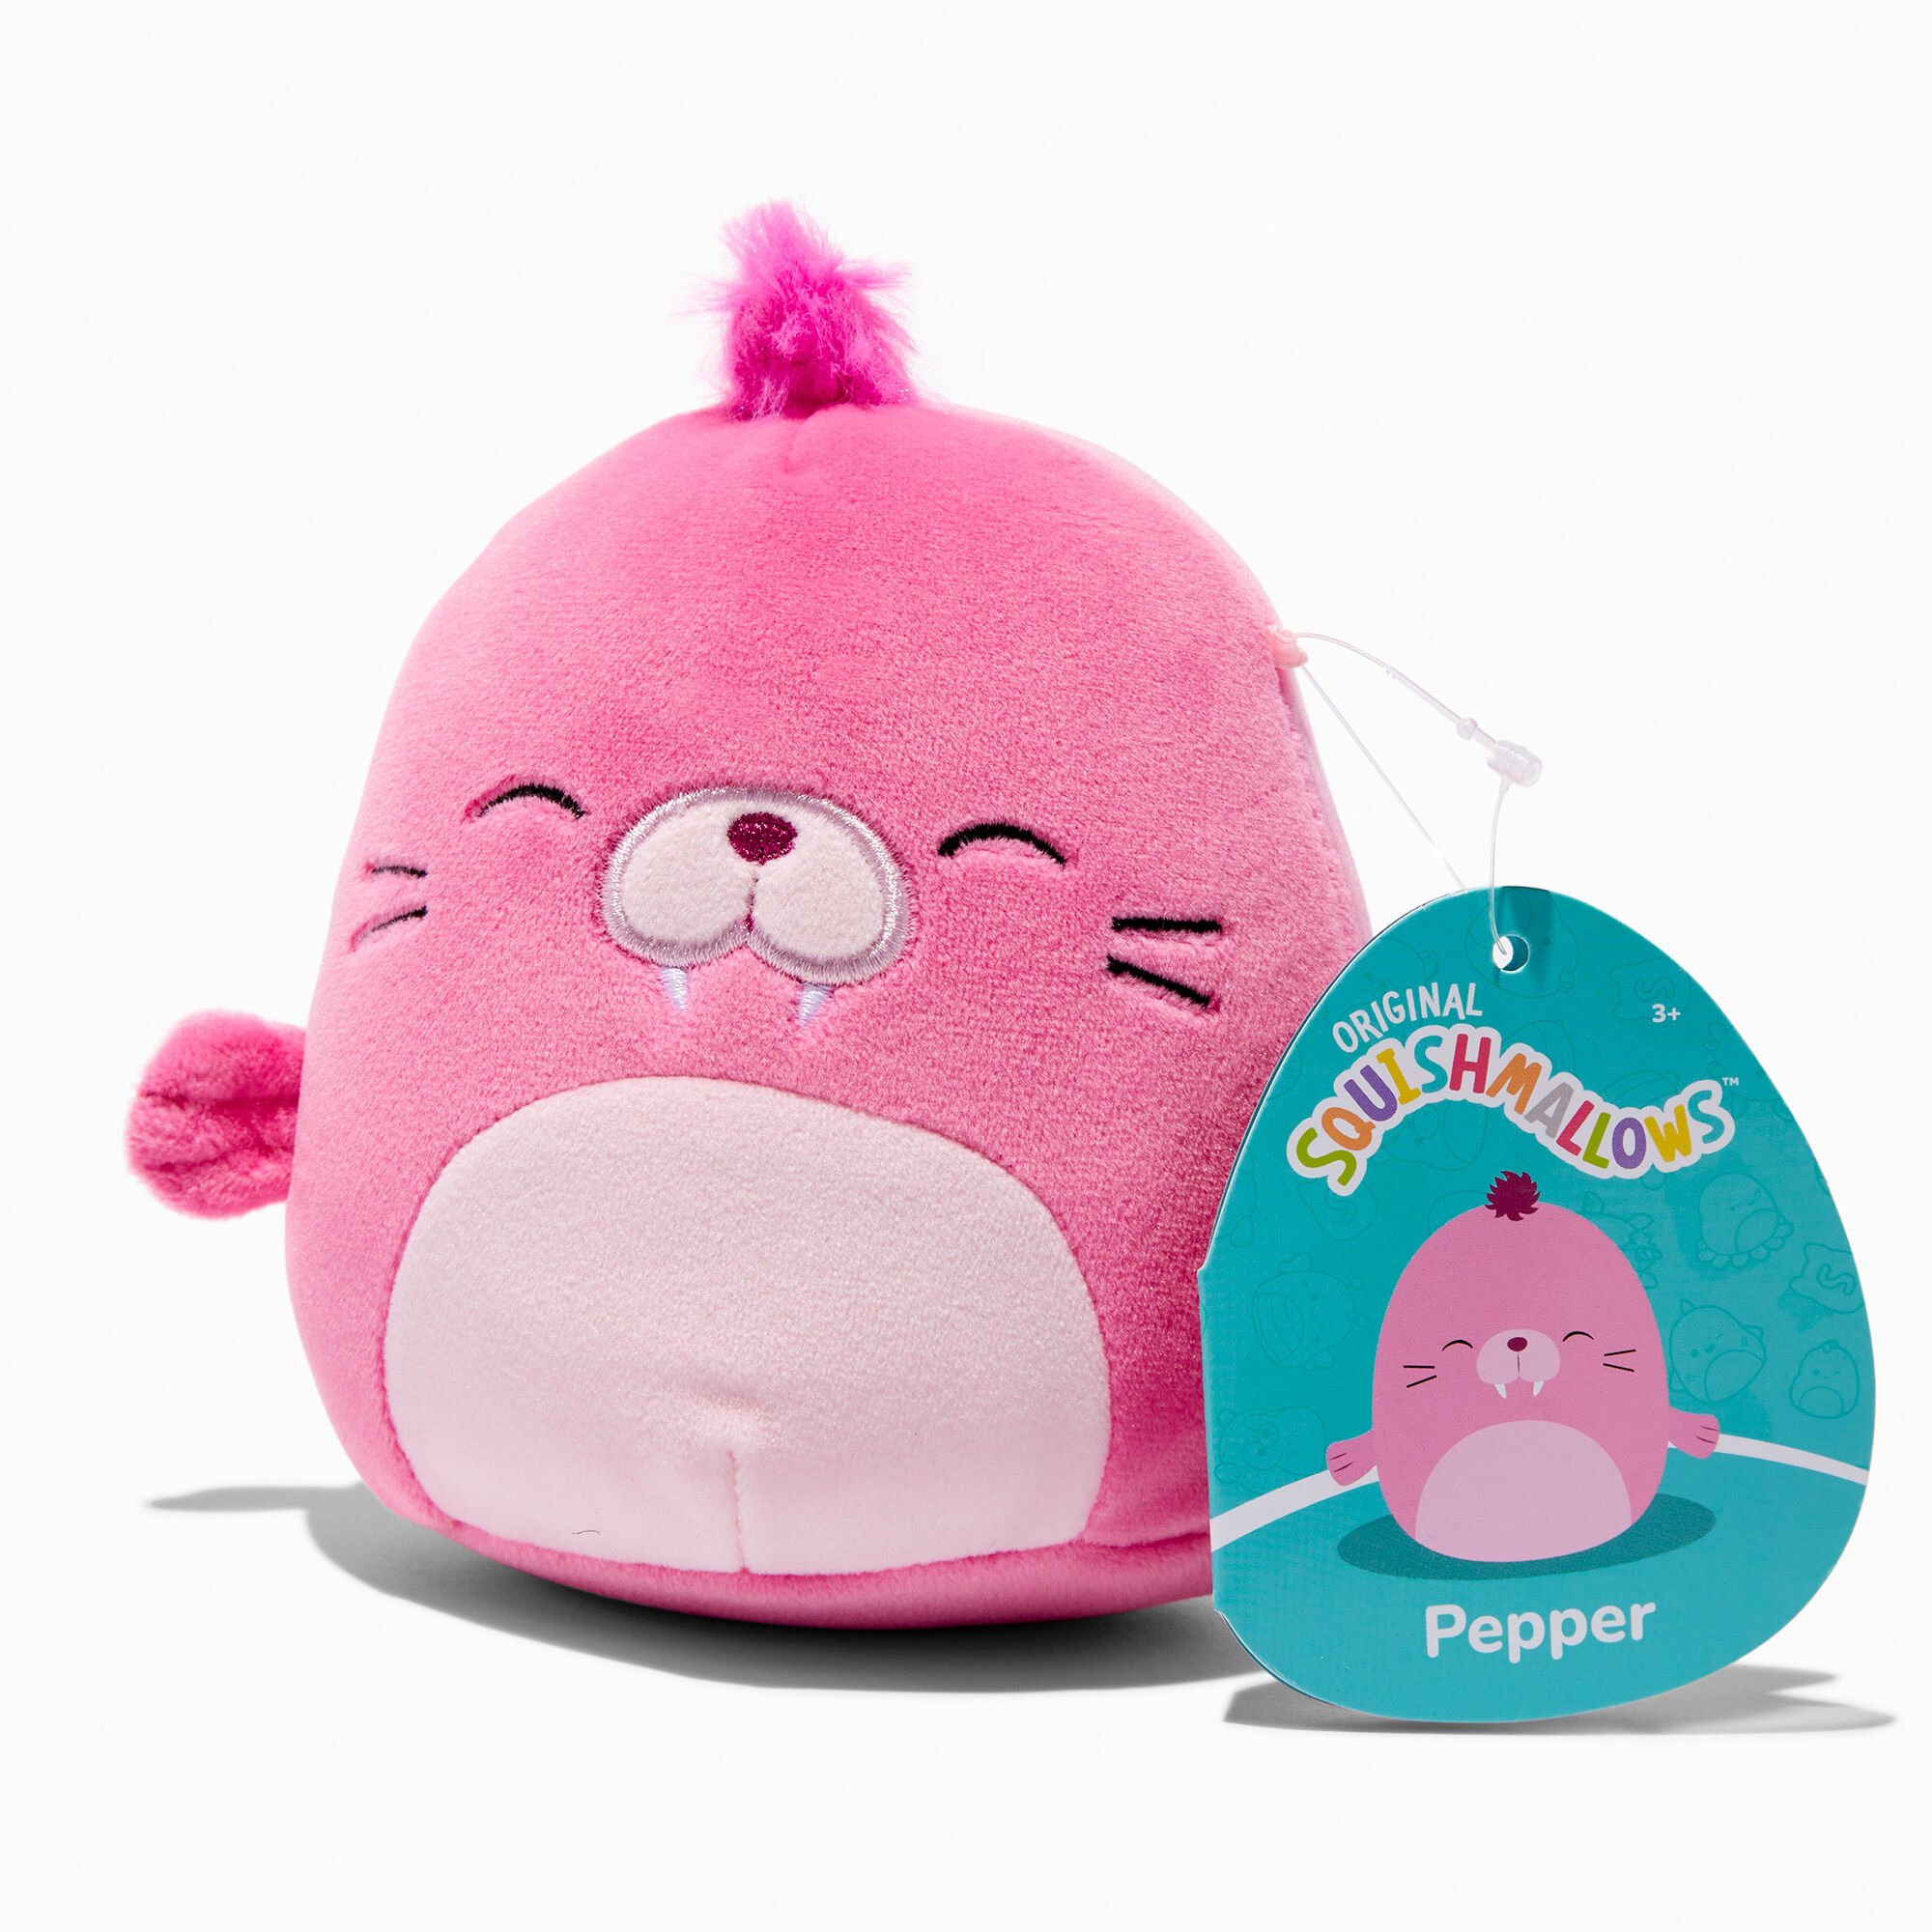 View Claires Squishmallows 5 Pepper Soft Toy information